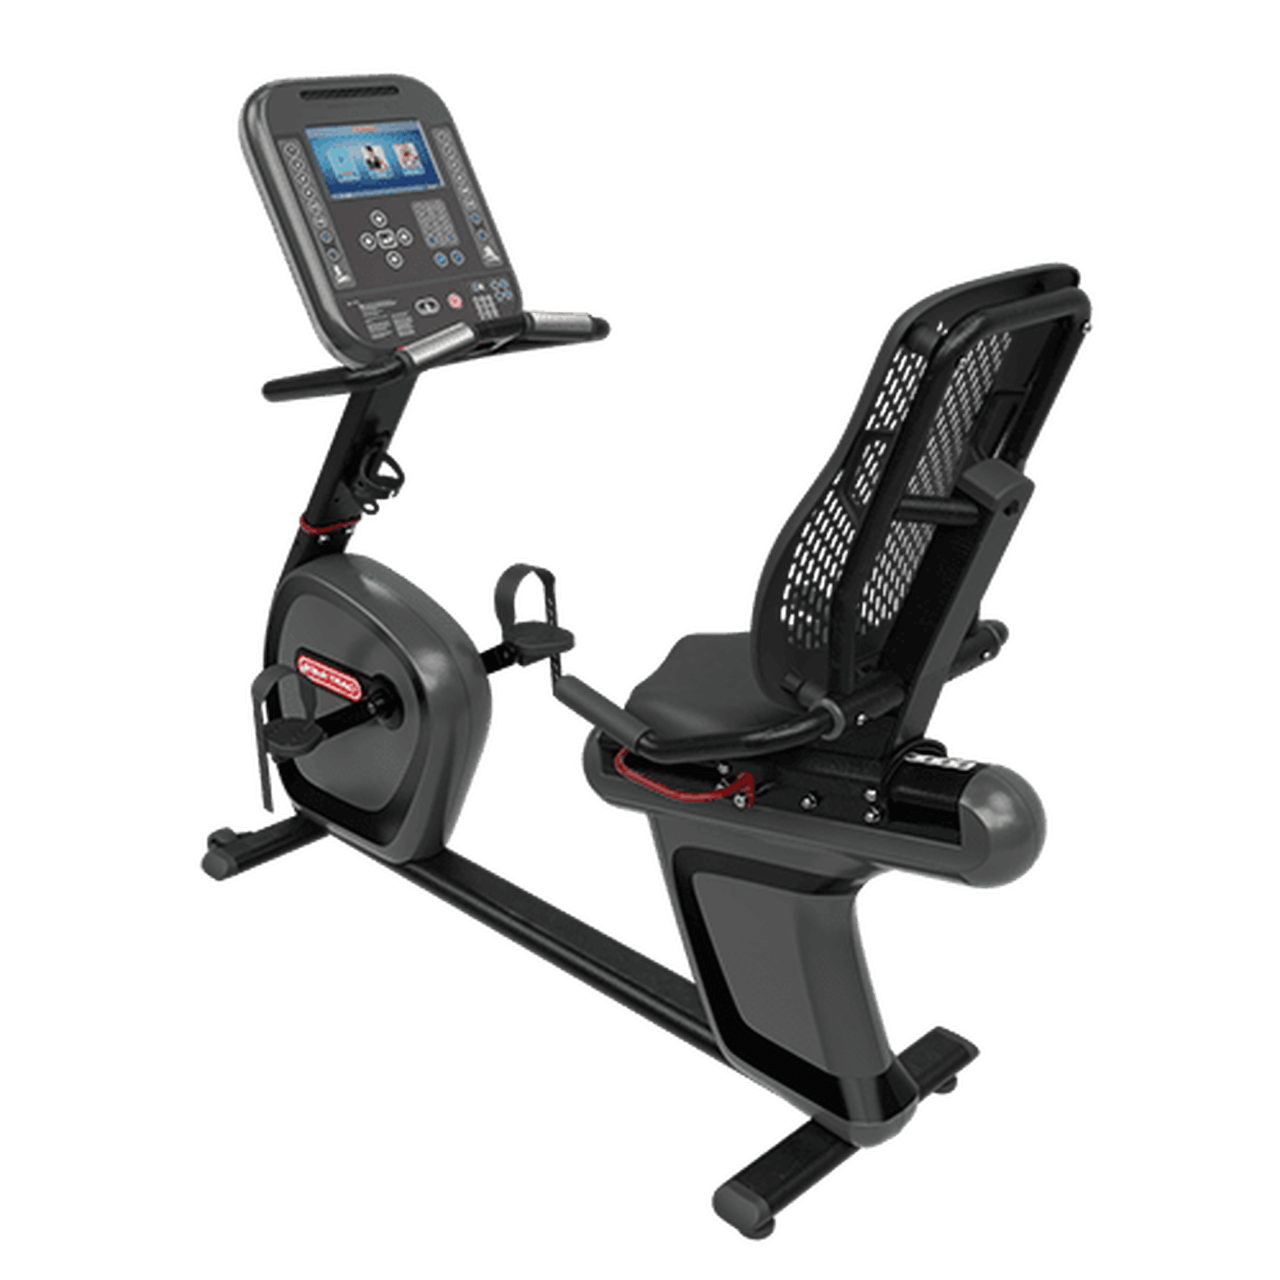 Star Trac 4 Series Commercial Recumbent Bike W/ 10" LCD Console